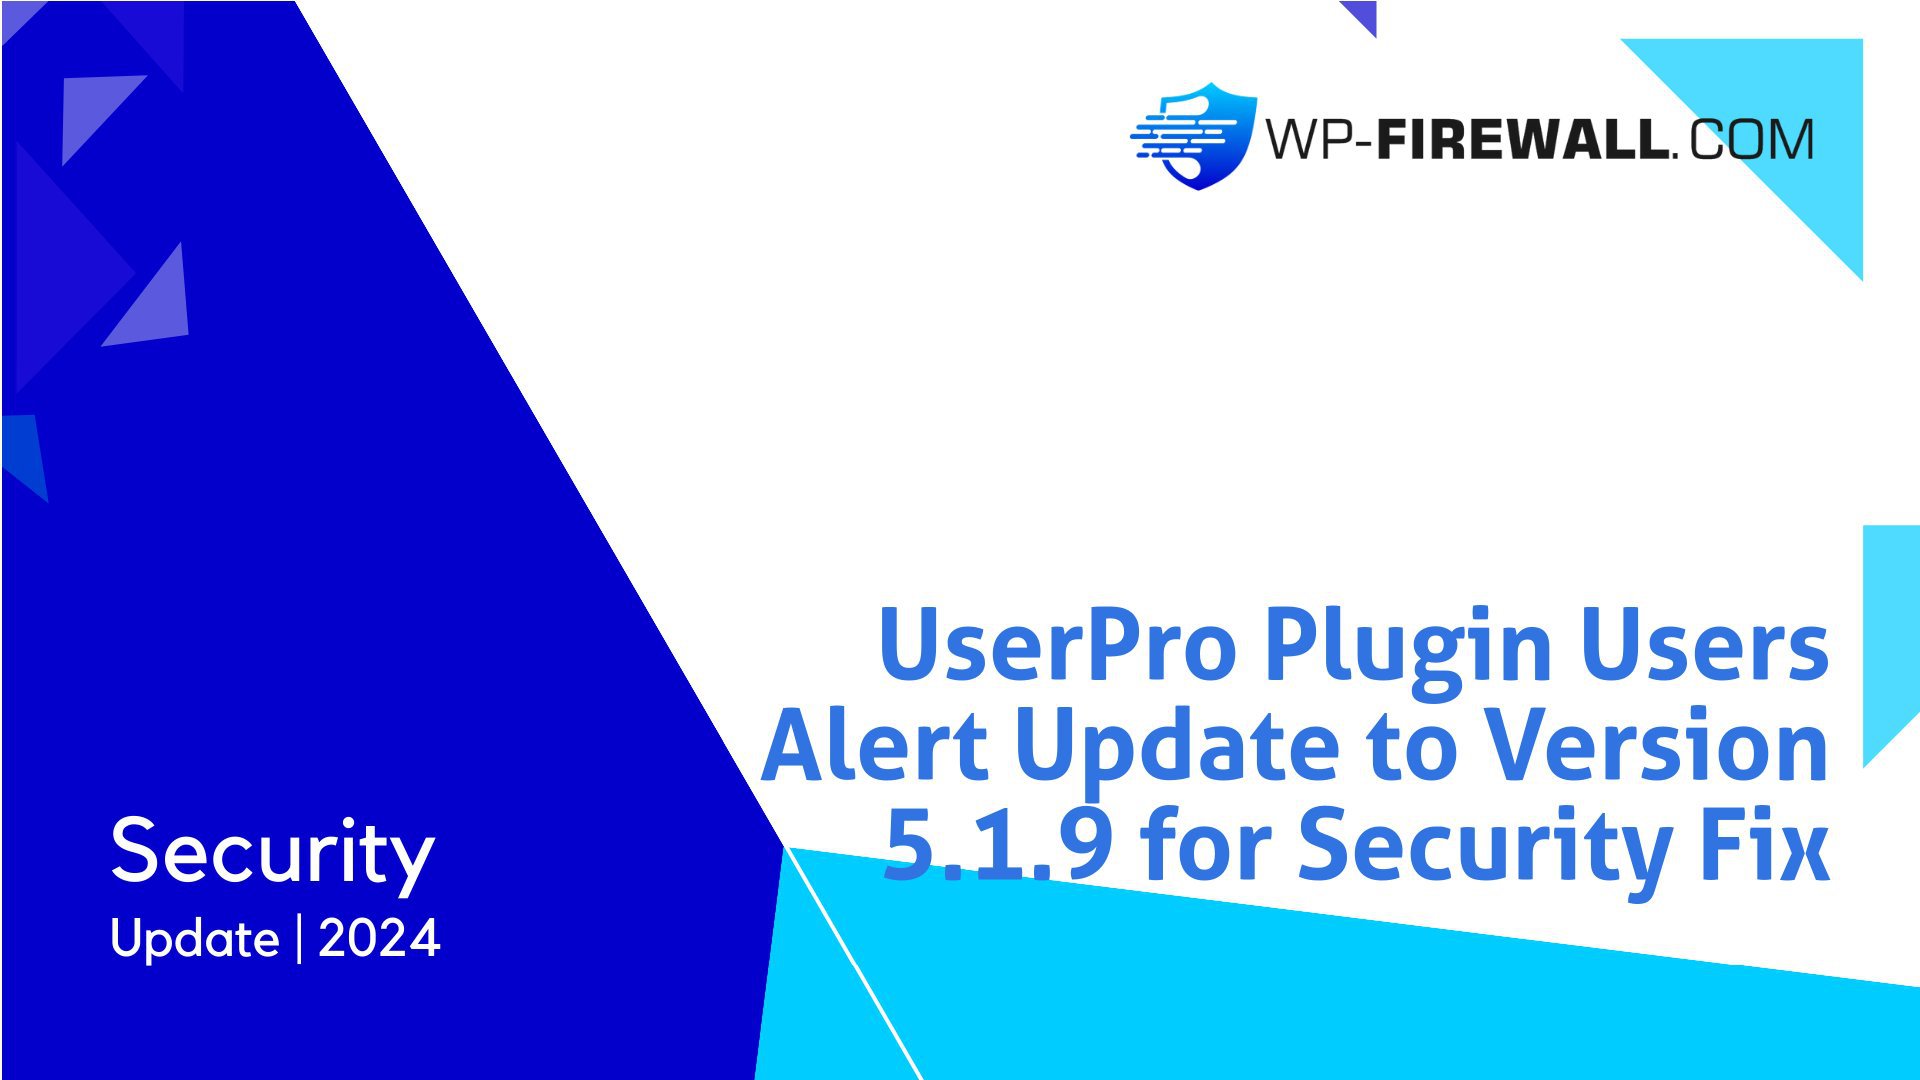 UserPro Plugin Users Alert Update to Version 5.1.9 for Security Fix cover